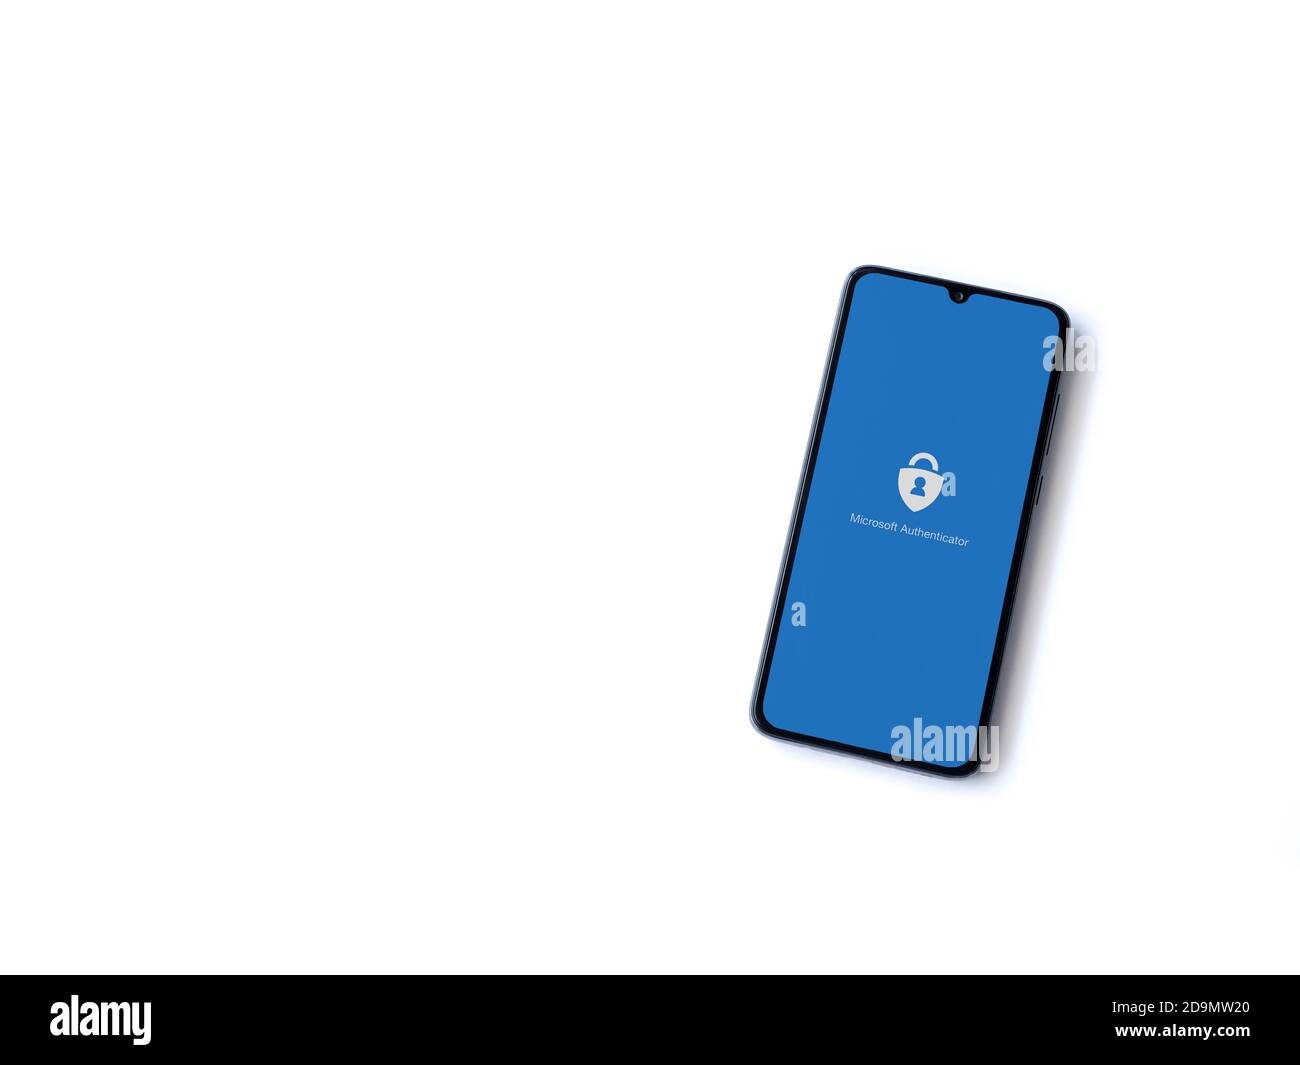 Lod, Israel - July 8, 2020: Microsoft Authenticator app launch screen with logo on the display of a black mobile smartphone isolated on white backgrou Stock Photo